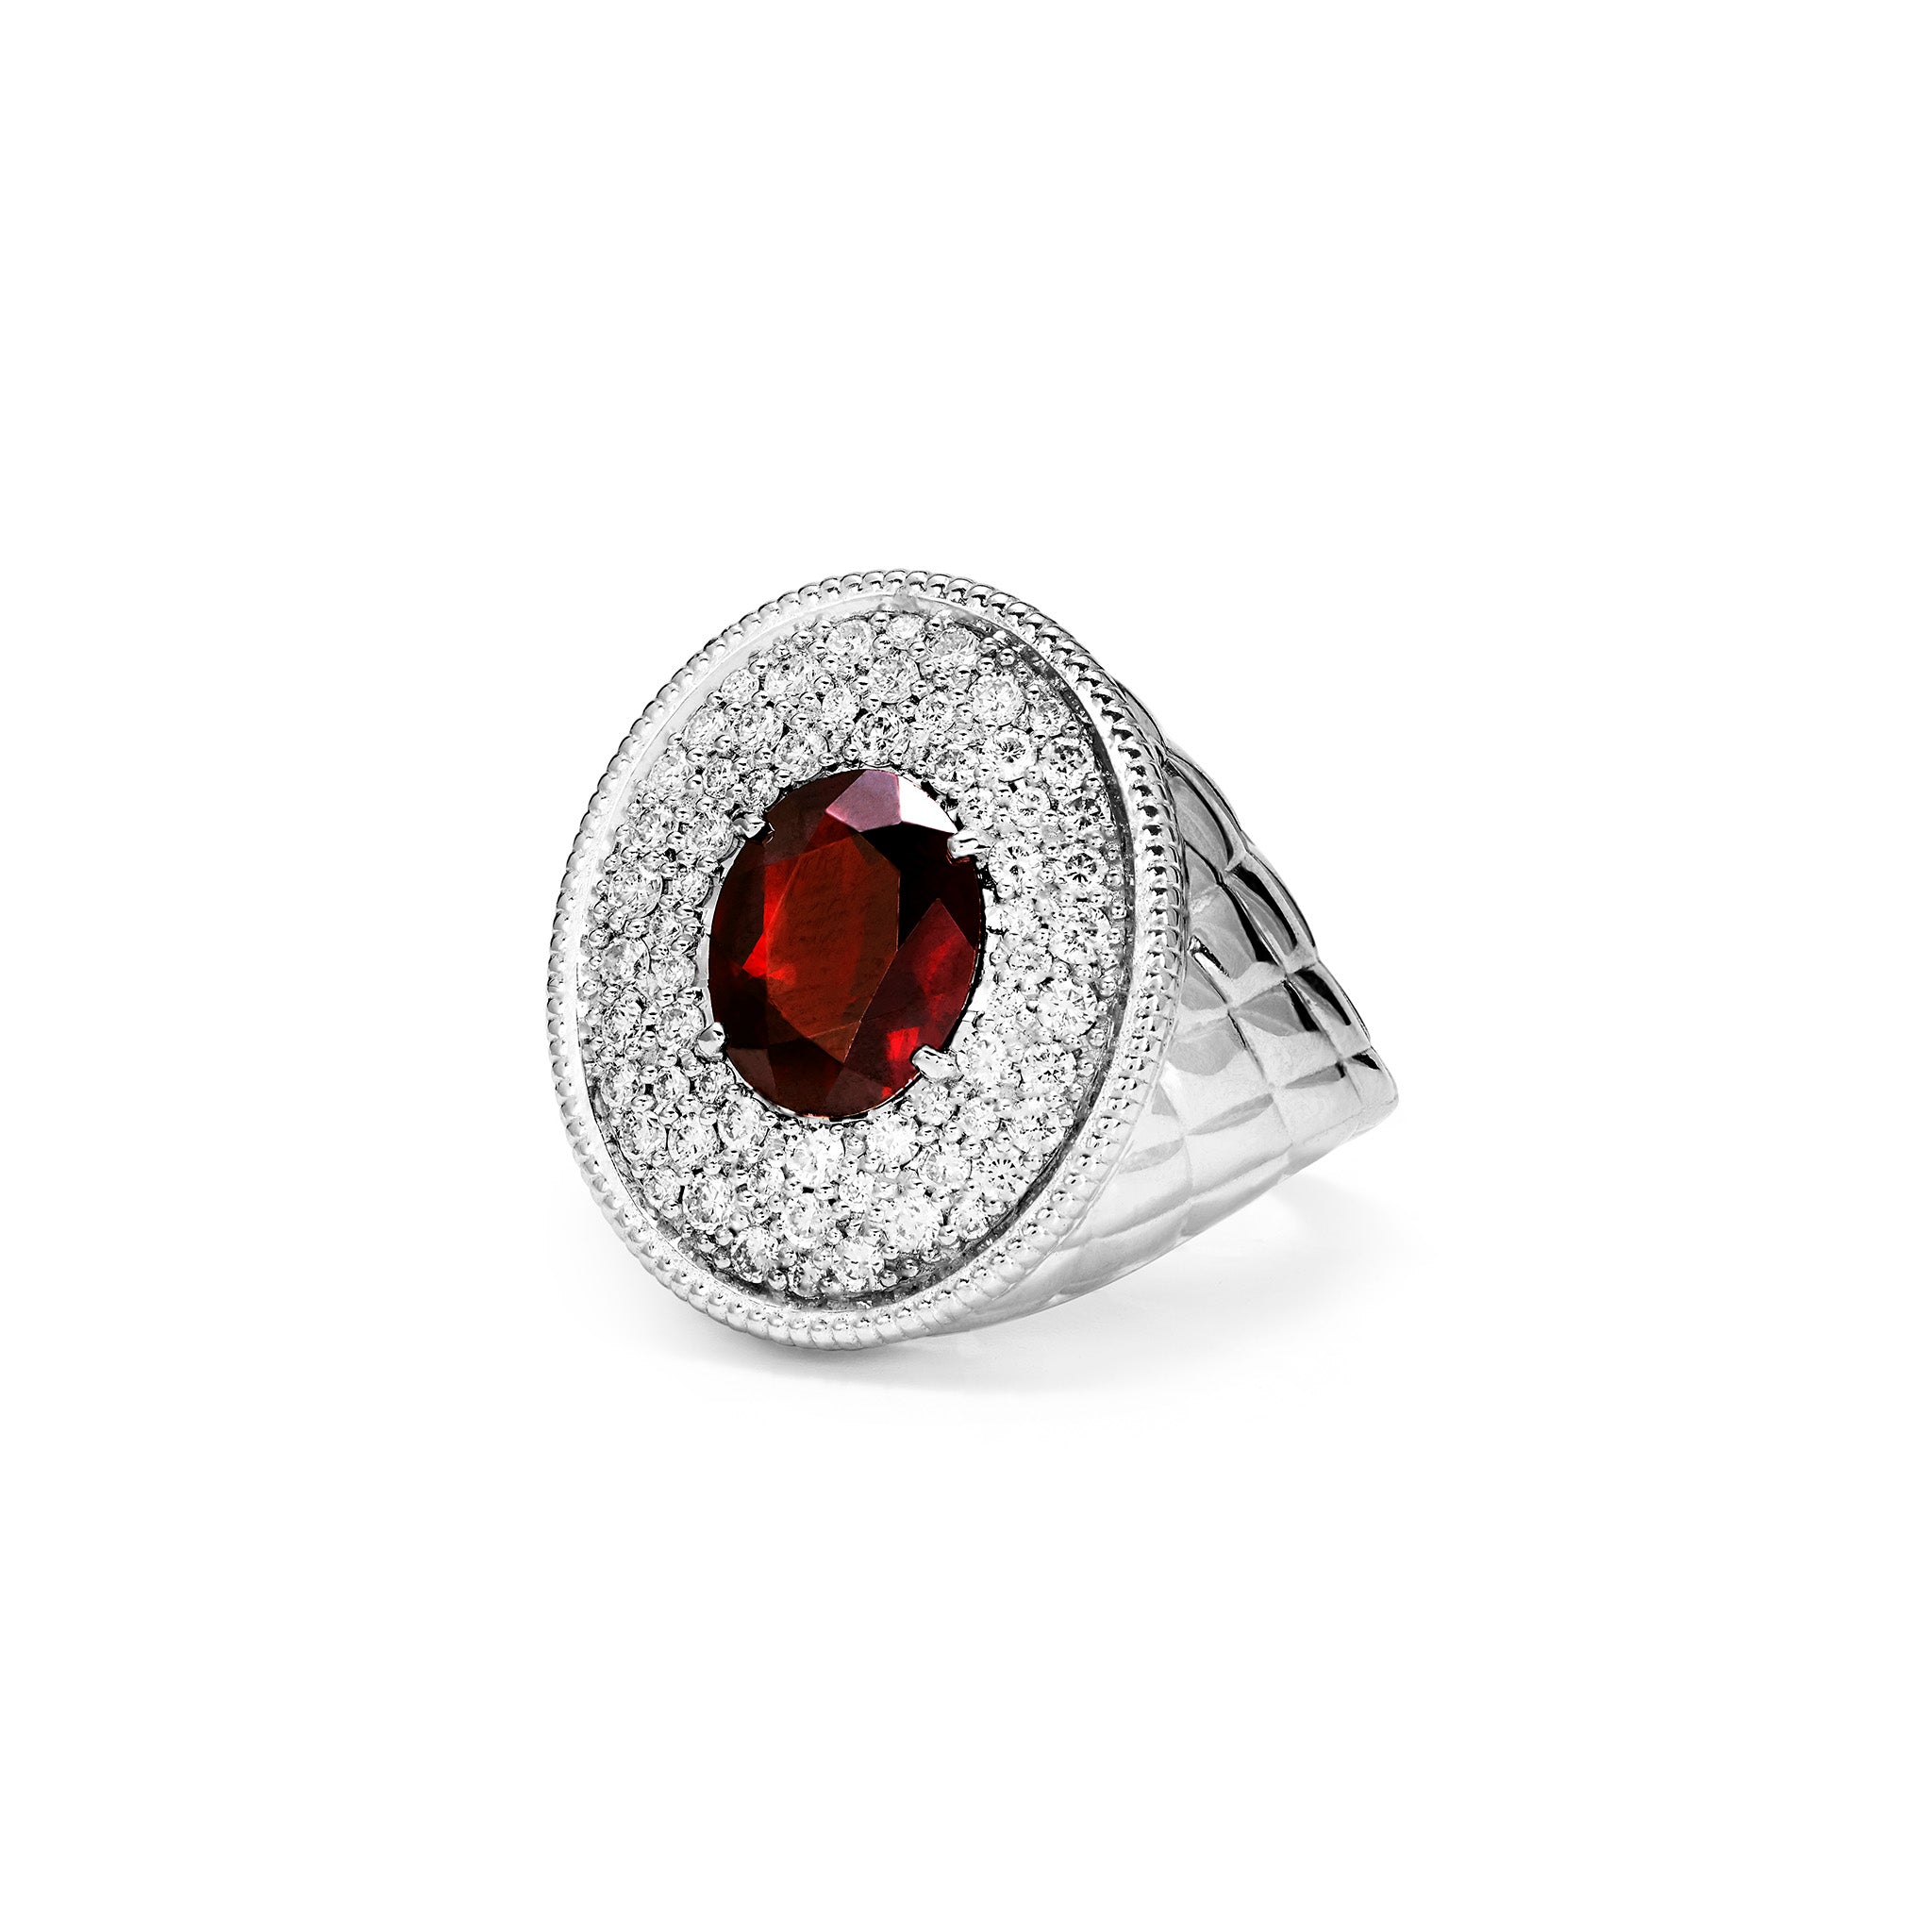 Max Oval Ring with Garnet and Diamonds